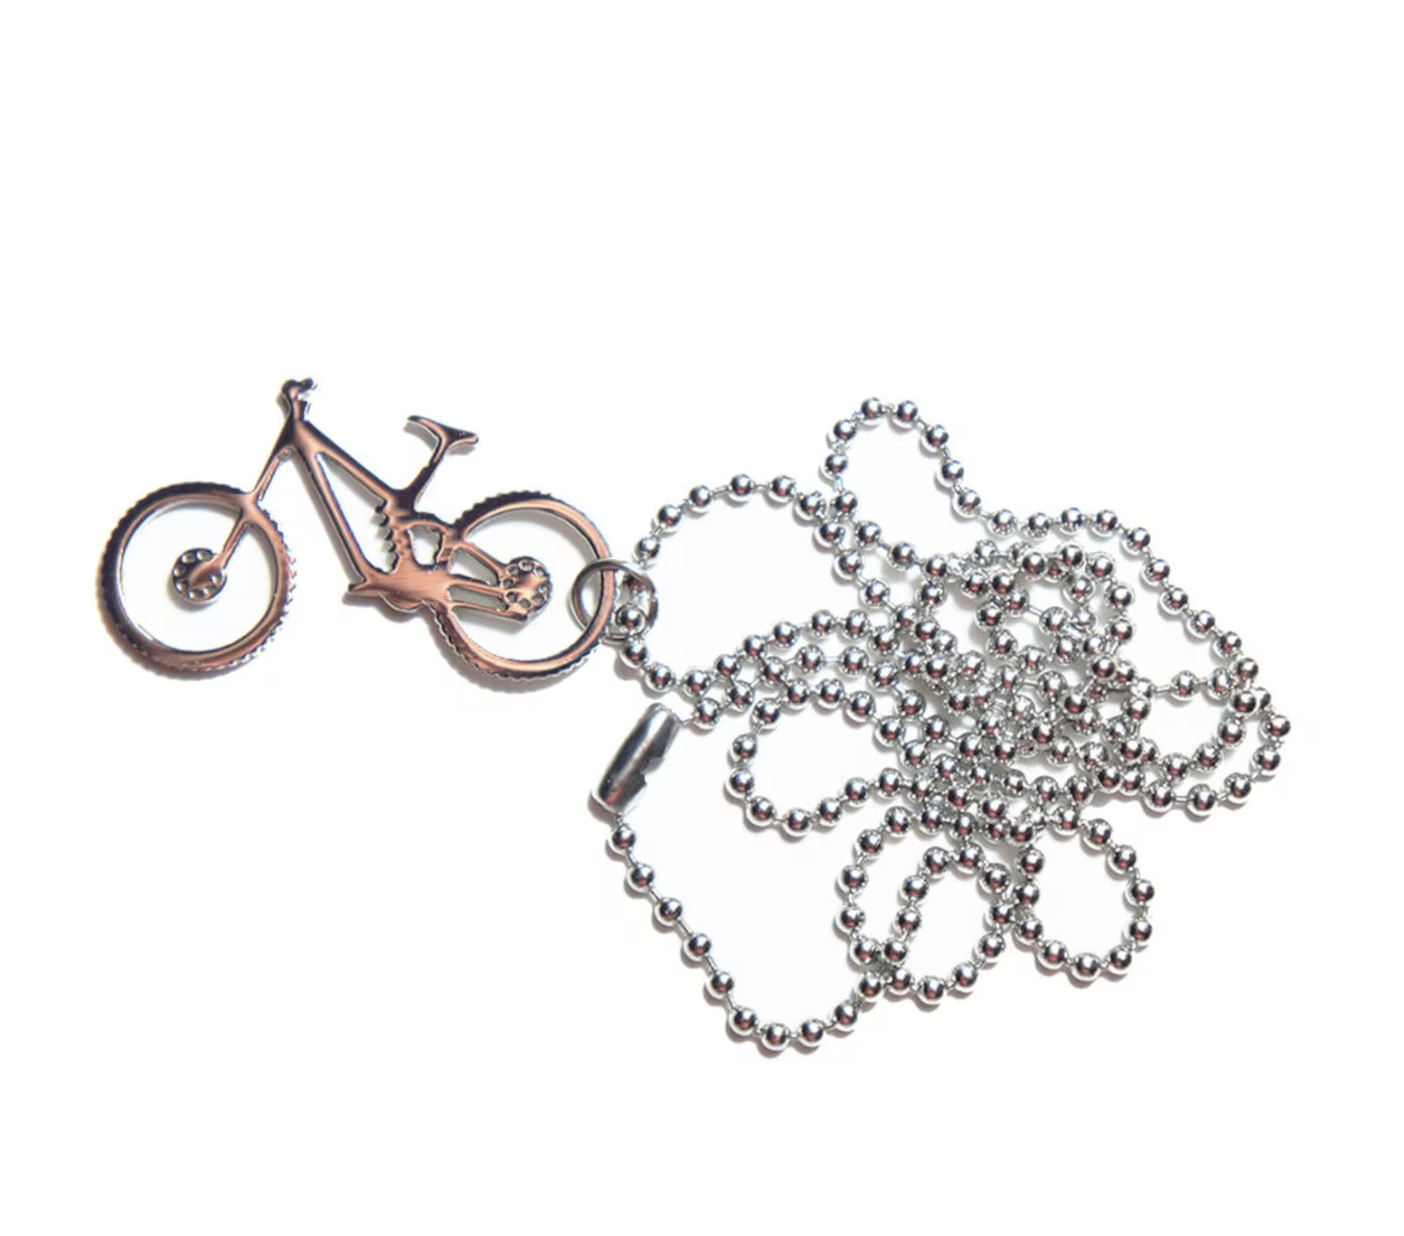 Get Love Bicycle Pendant With Chain Necklace Silver at ₹ 329 | LBB Shop